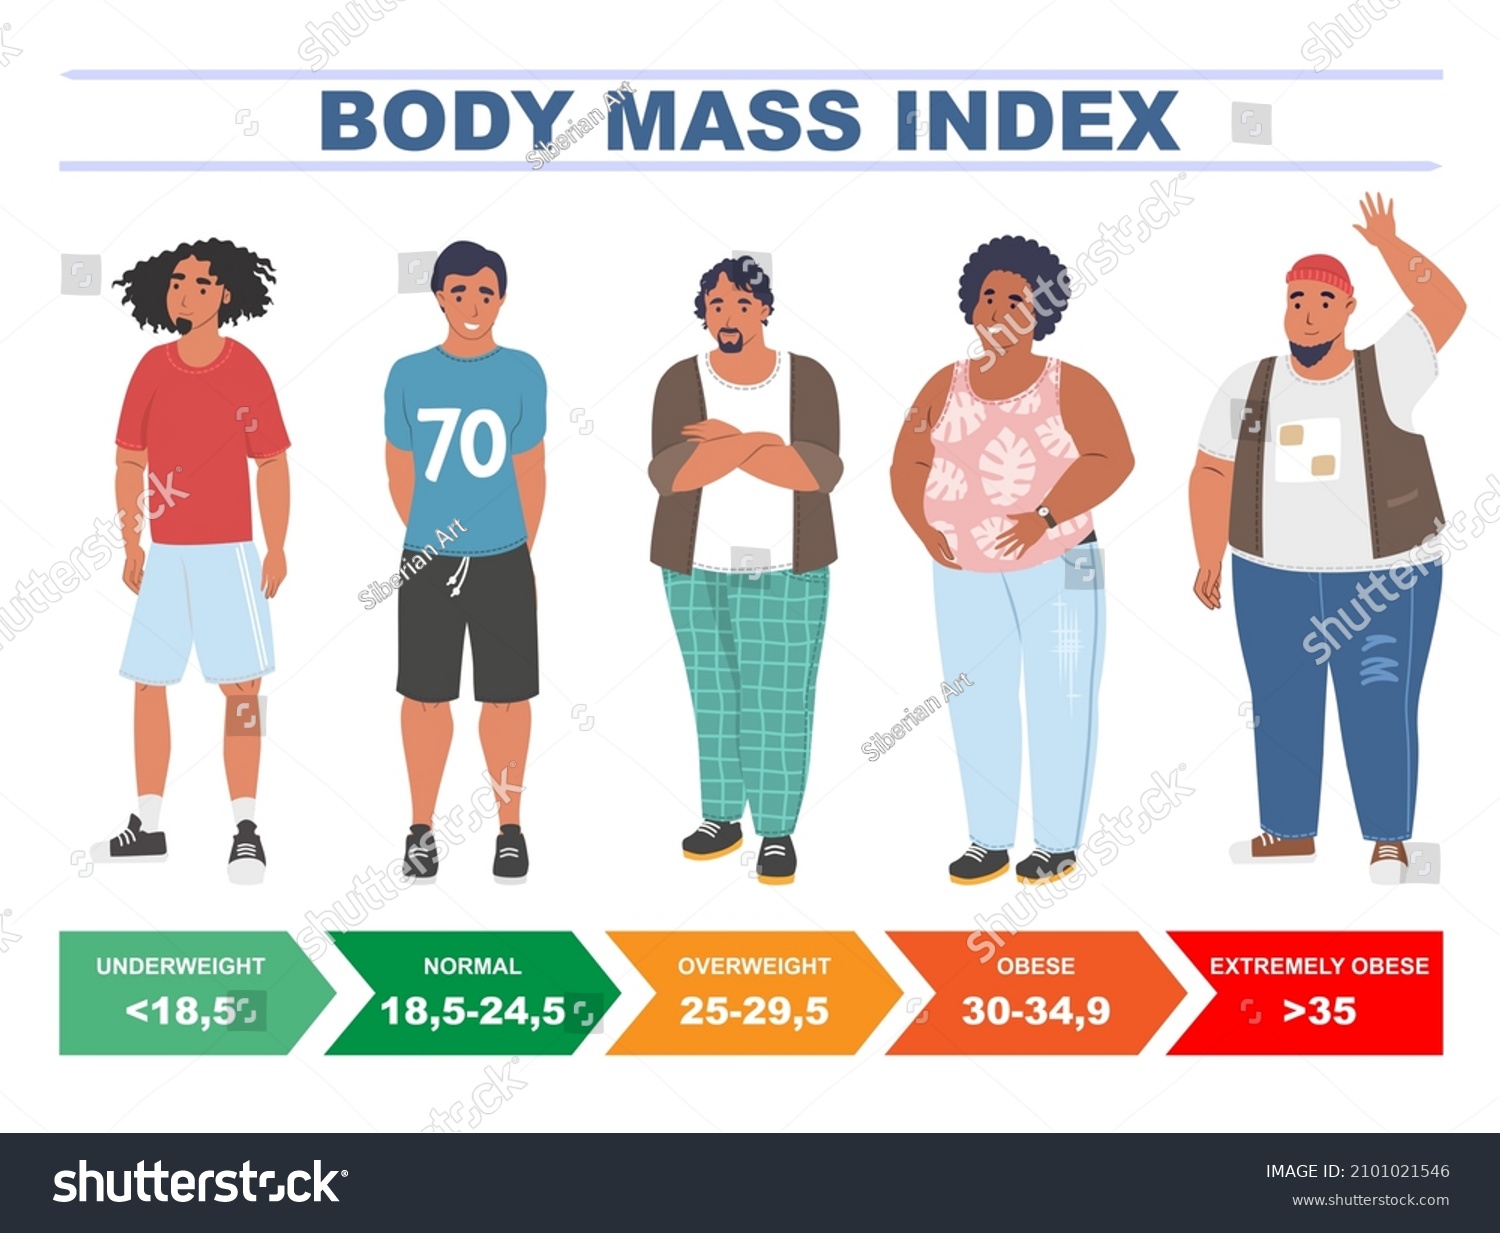 SVG of BMI for men, flat vector illustration. Body mass index chart including extremely obese, obese, overweight, normal and underweight ranges. Body fat measure based on height and weight. svg